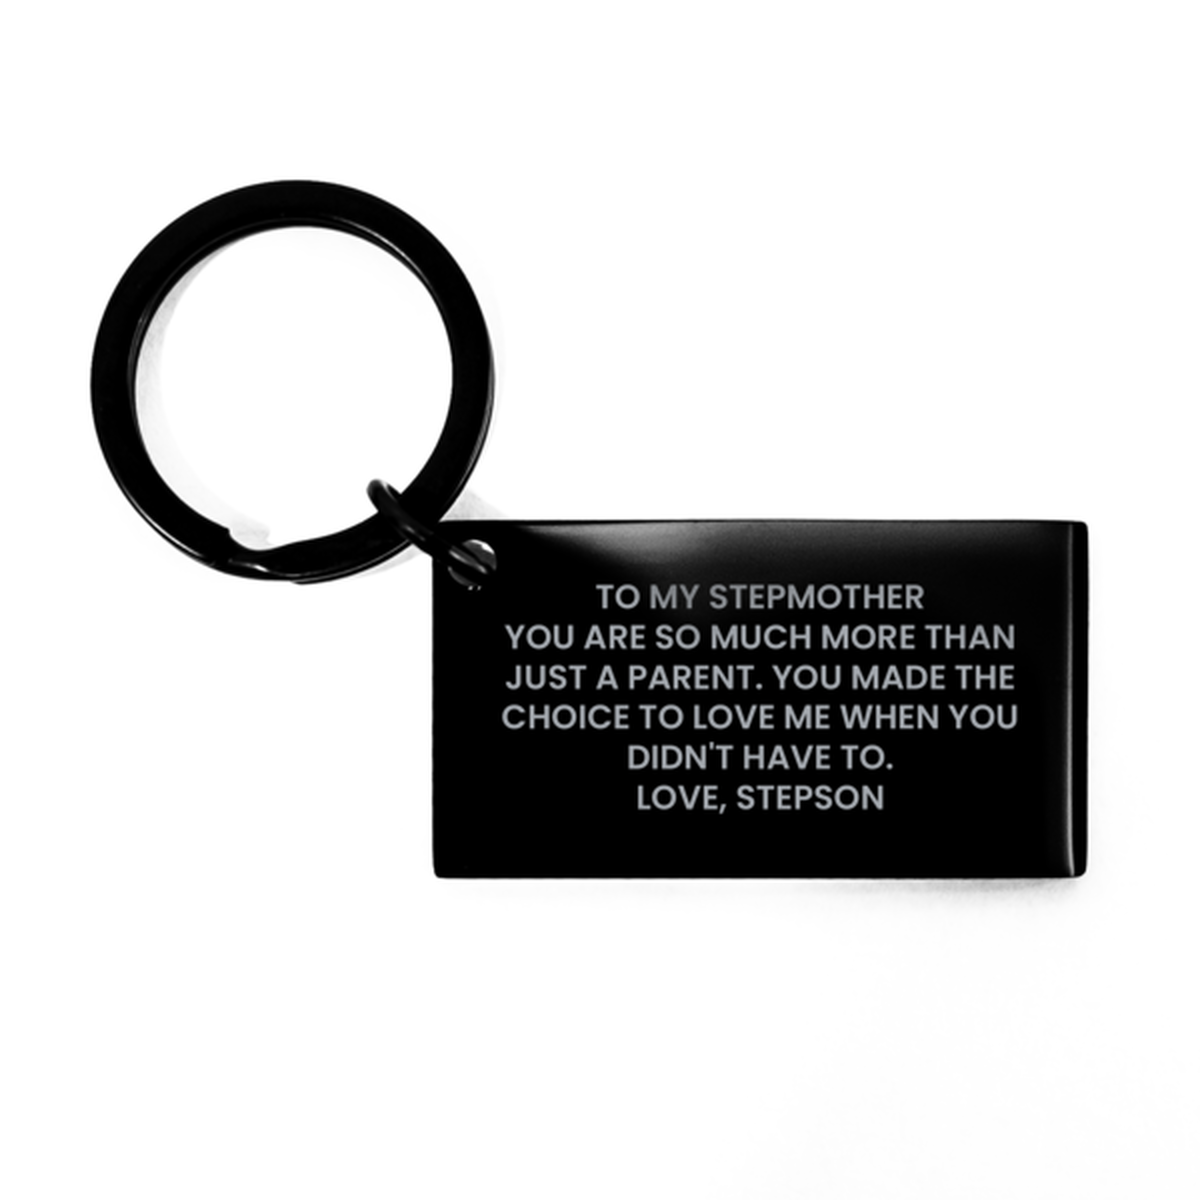 To My Stepmother   Black Keychain, Just A Parent, Valentines Gifts For Stepmother From Stepson, Birthday Gifts For Women